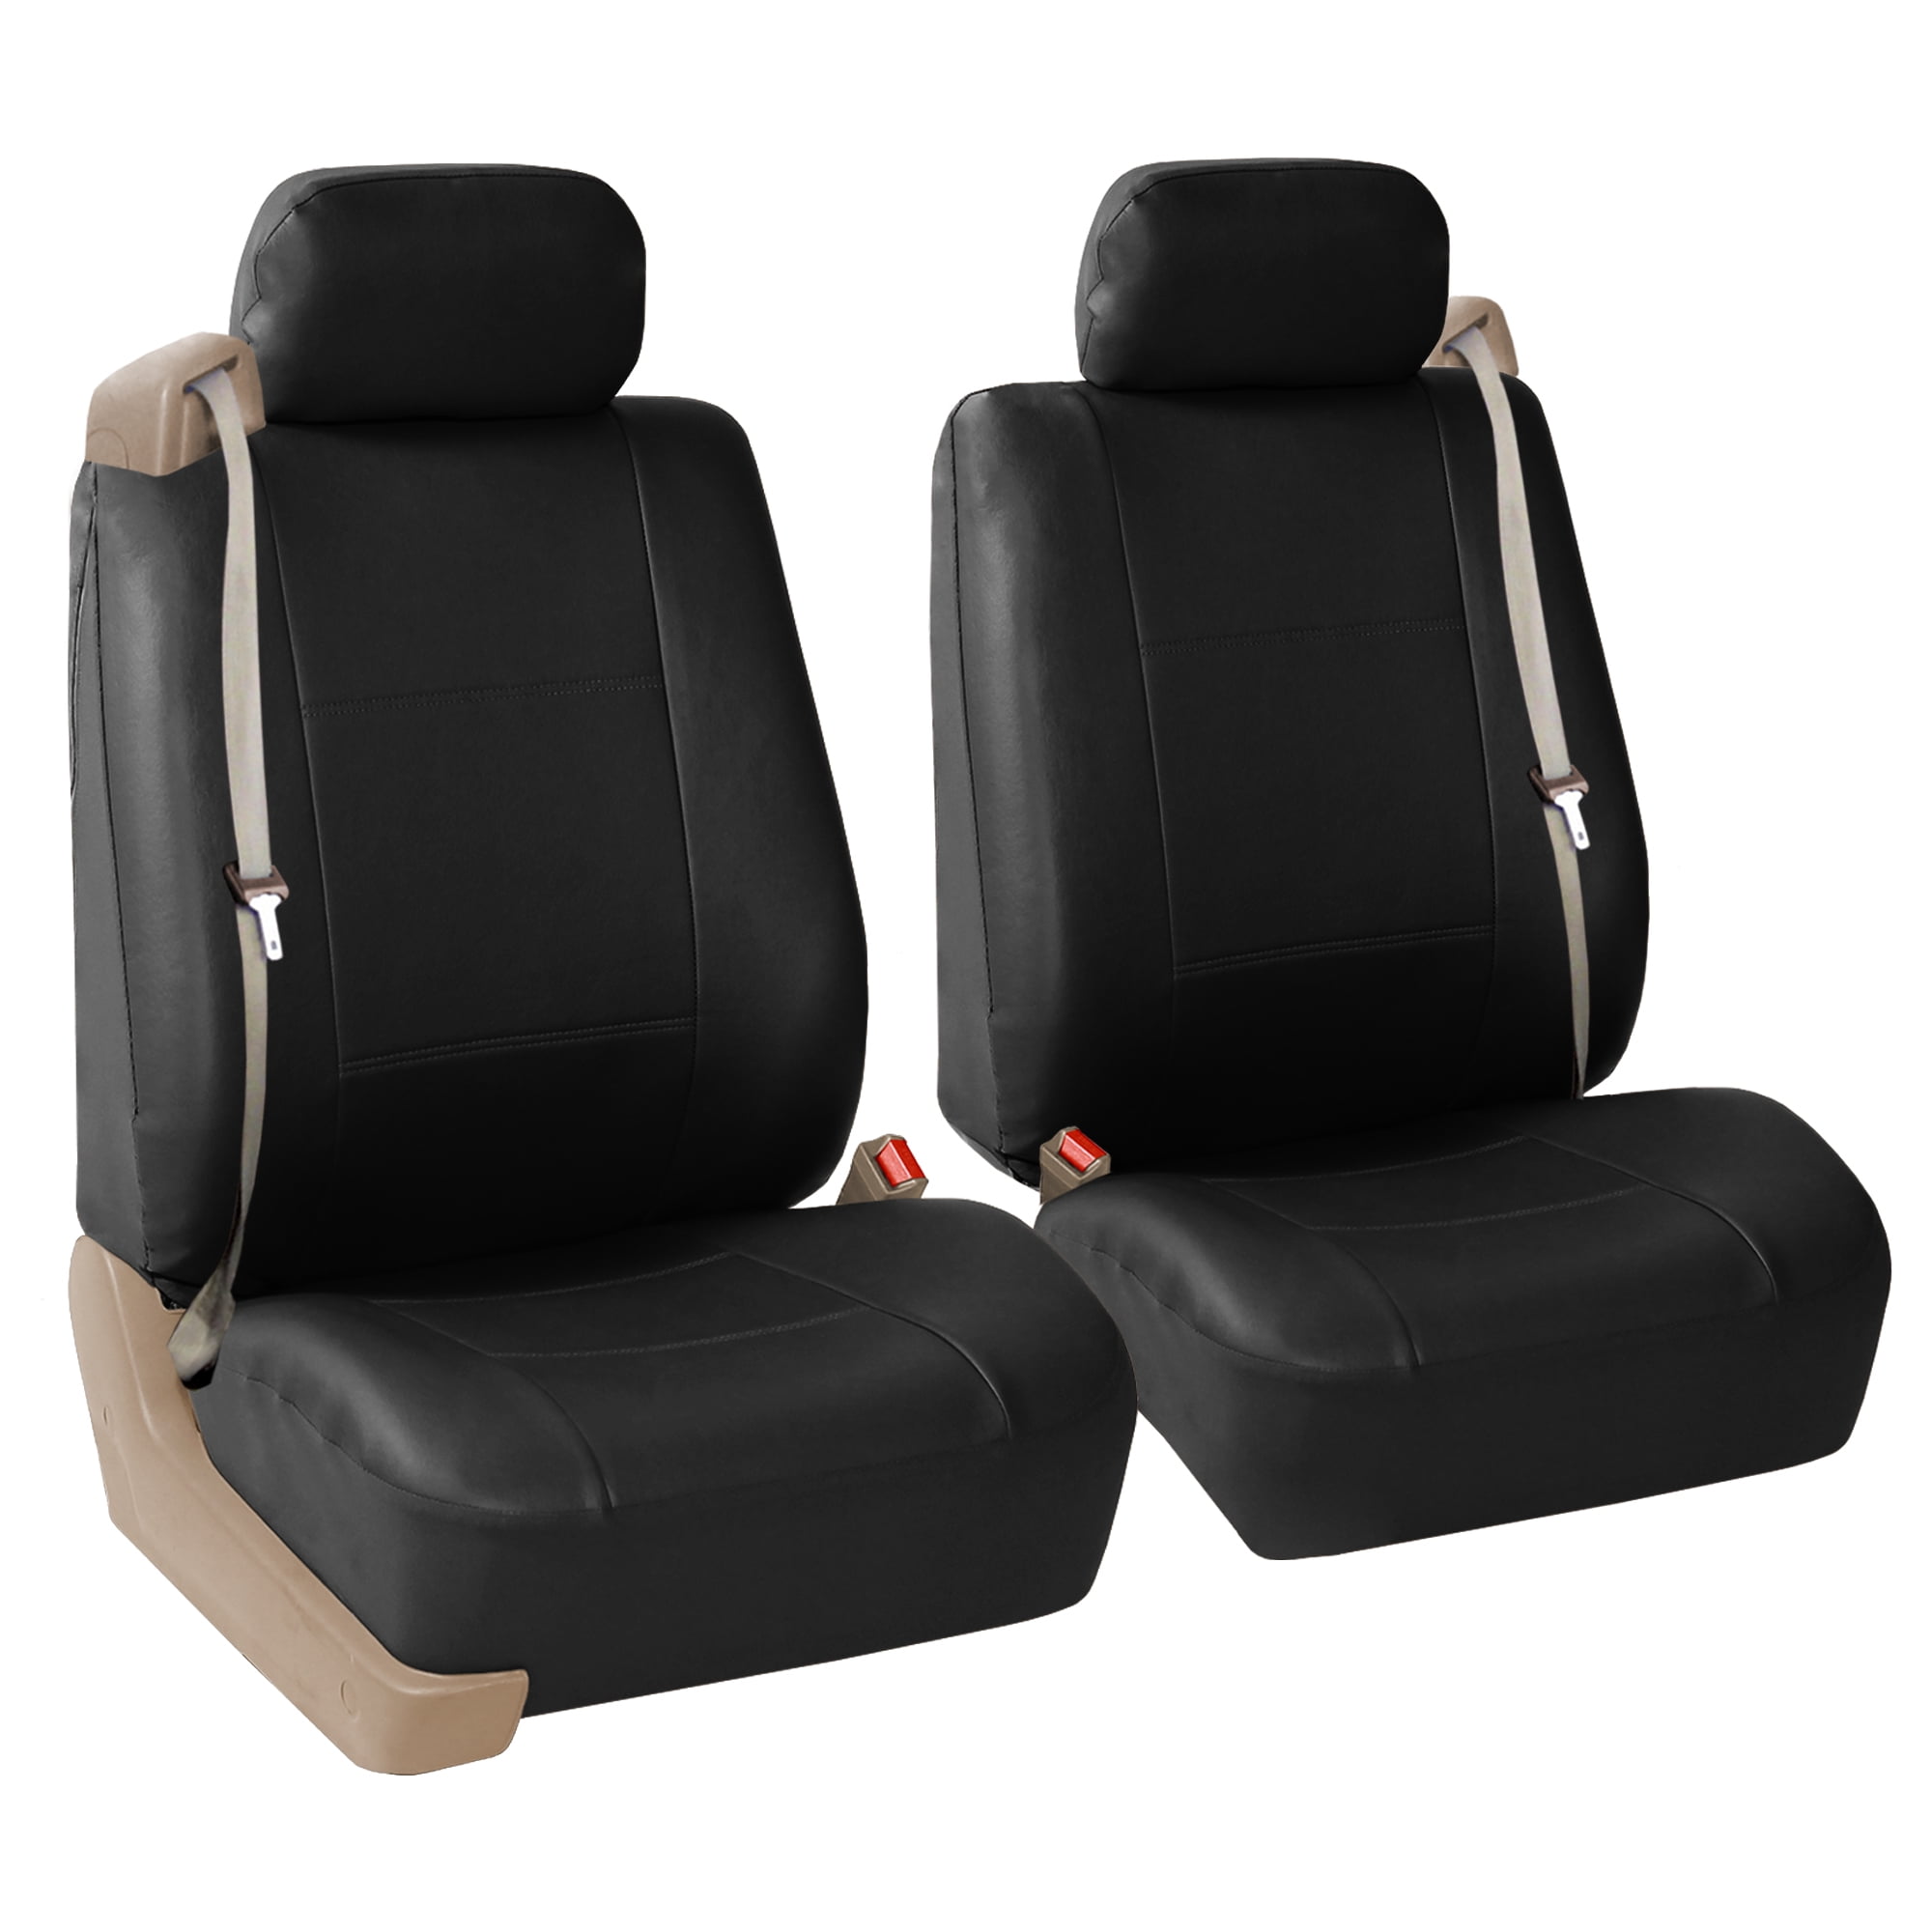 FH Group Universal Fit PU Leather Car Seat Covers for Sedan SUV Van Truck  with Integrated Seatbelt and Airbag Compatible, Waterproof, UV-Resistant,  Durable, Easy to Install Front Set